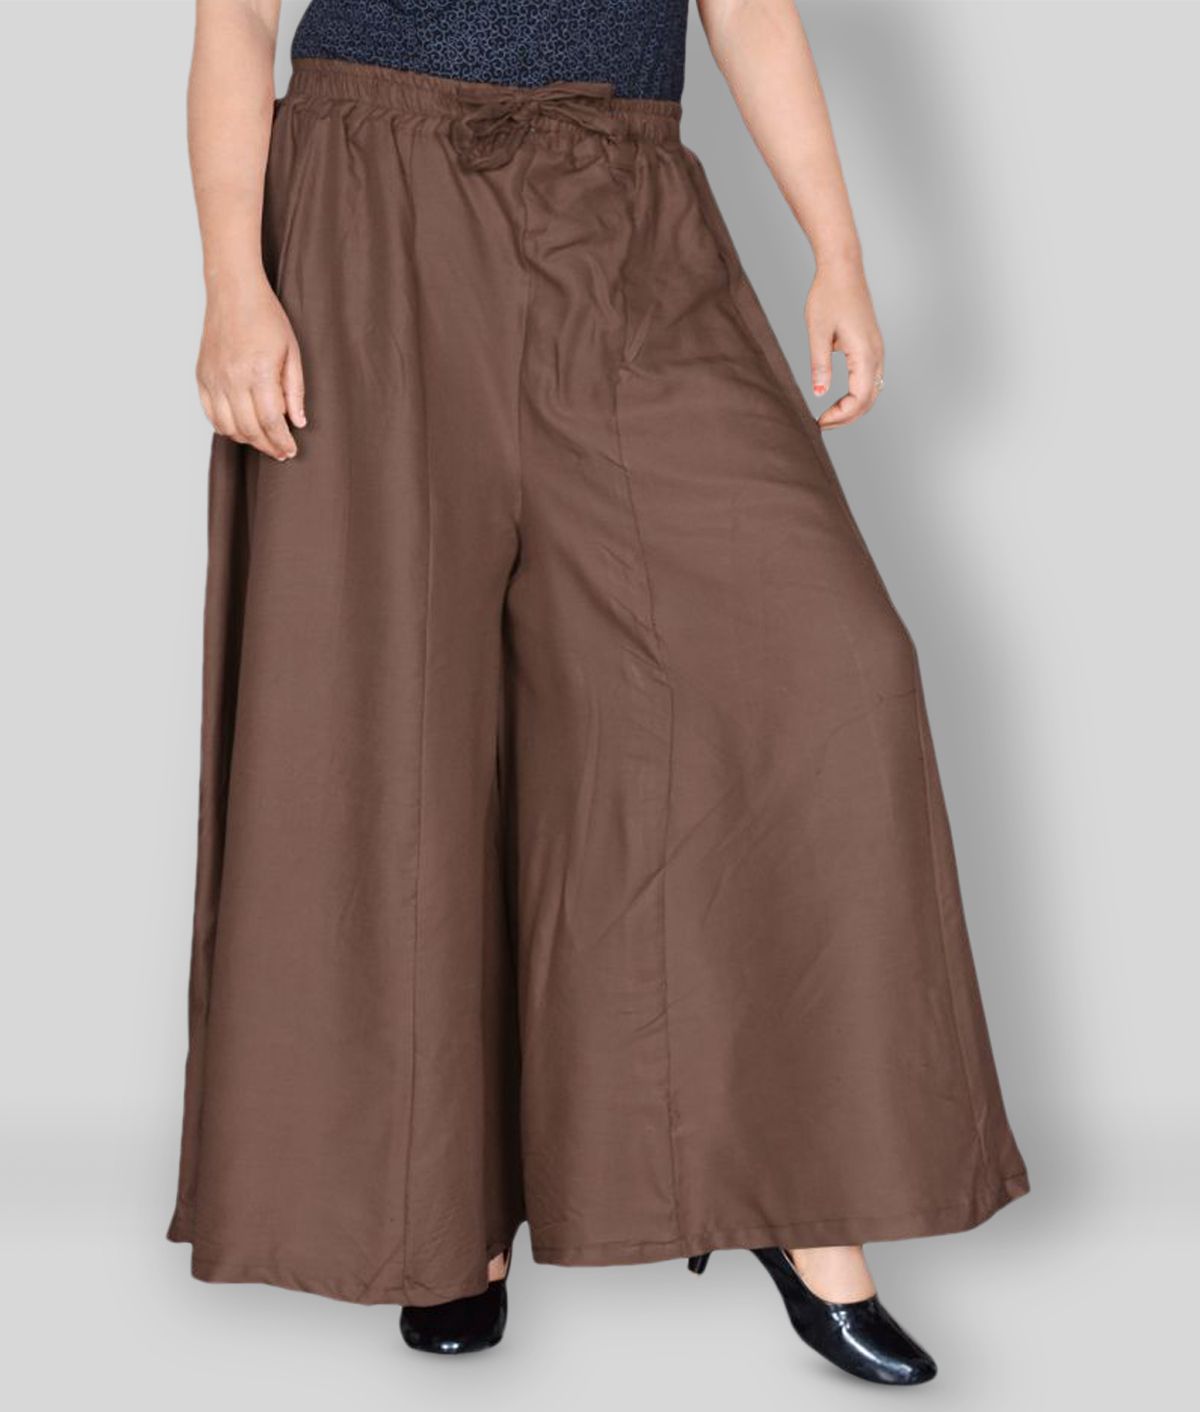 Sttoffa - Brown Rayon Flared Women's Palazzos ( Pack of 1 )